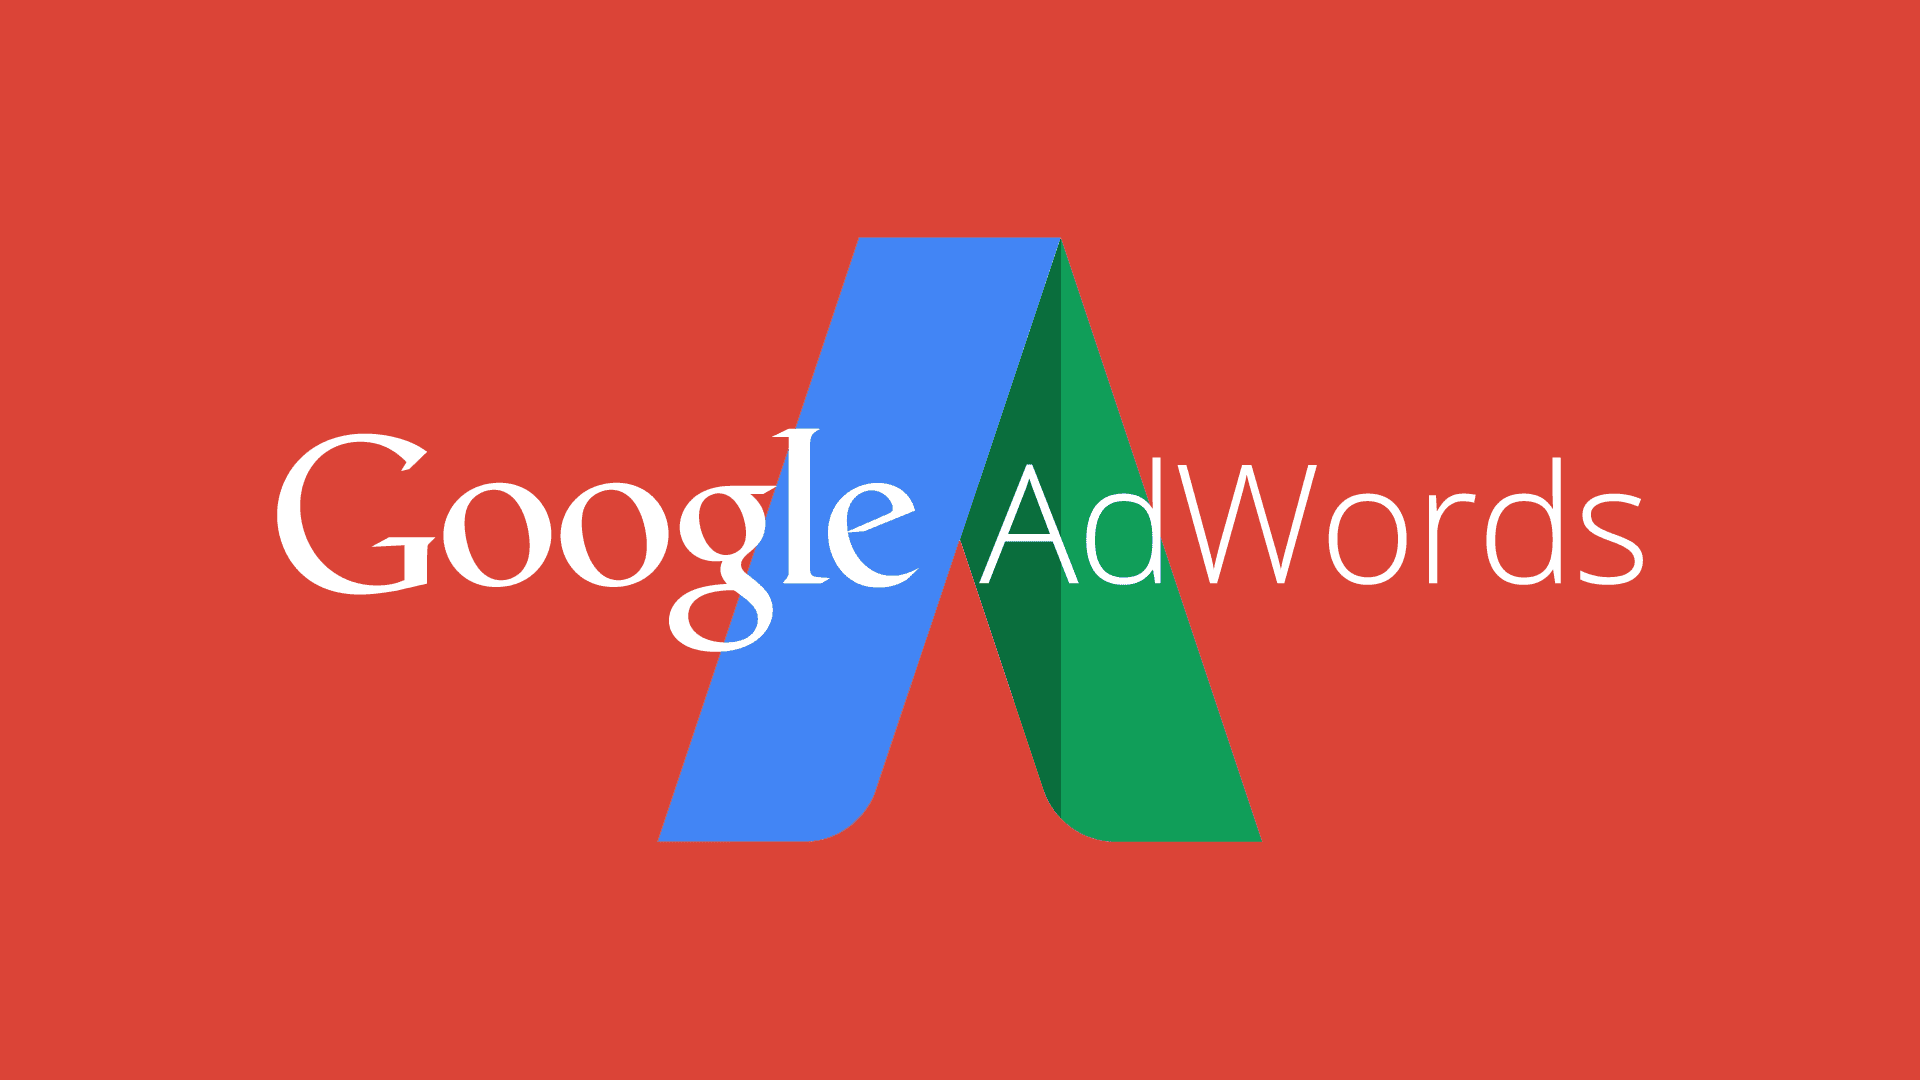 Bidding Strategy For Google Adwords PPC Campaign?